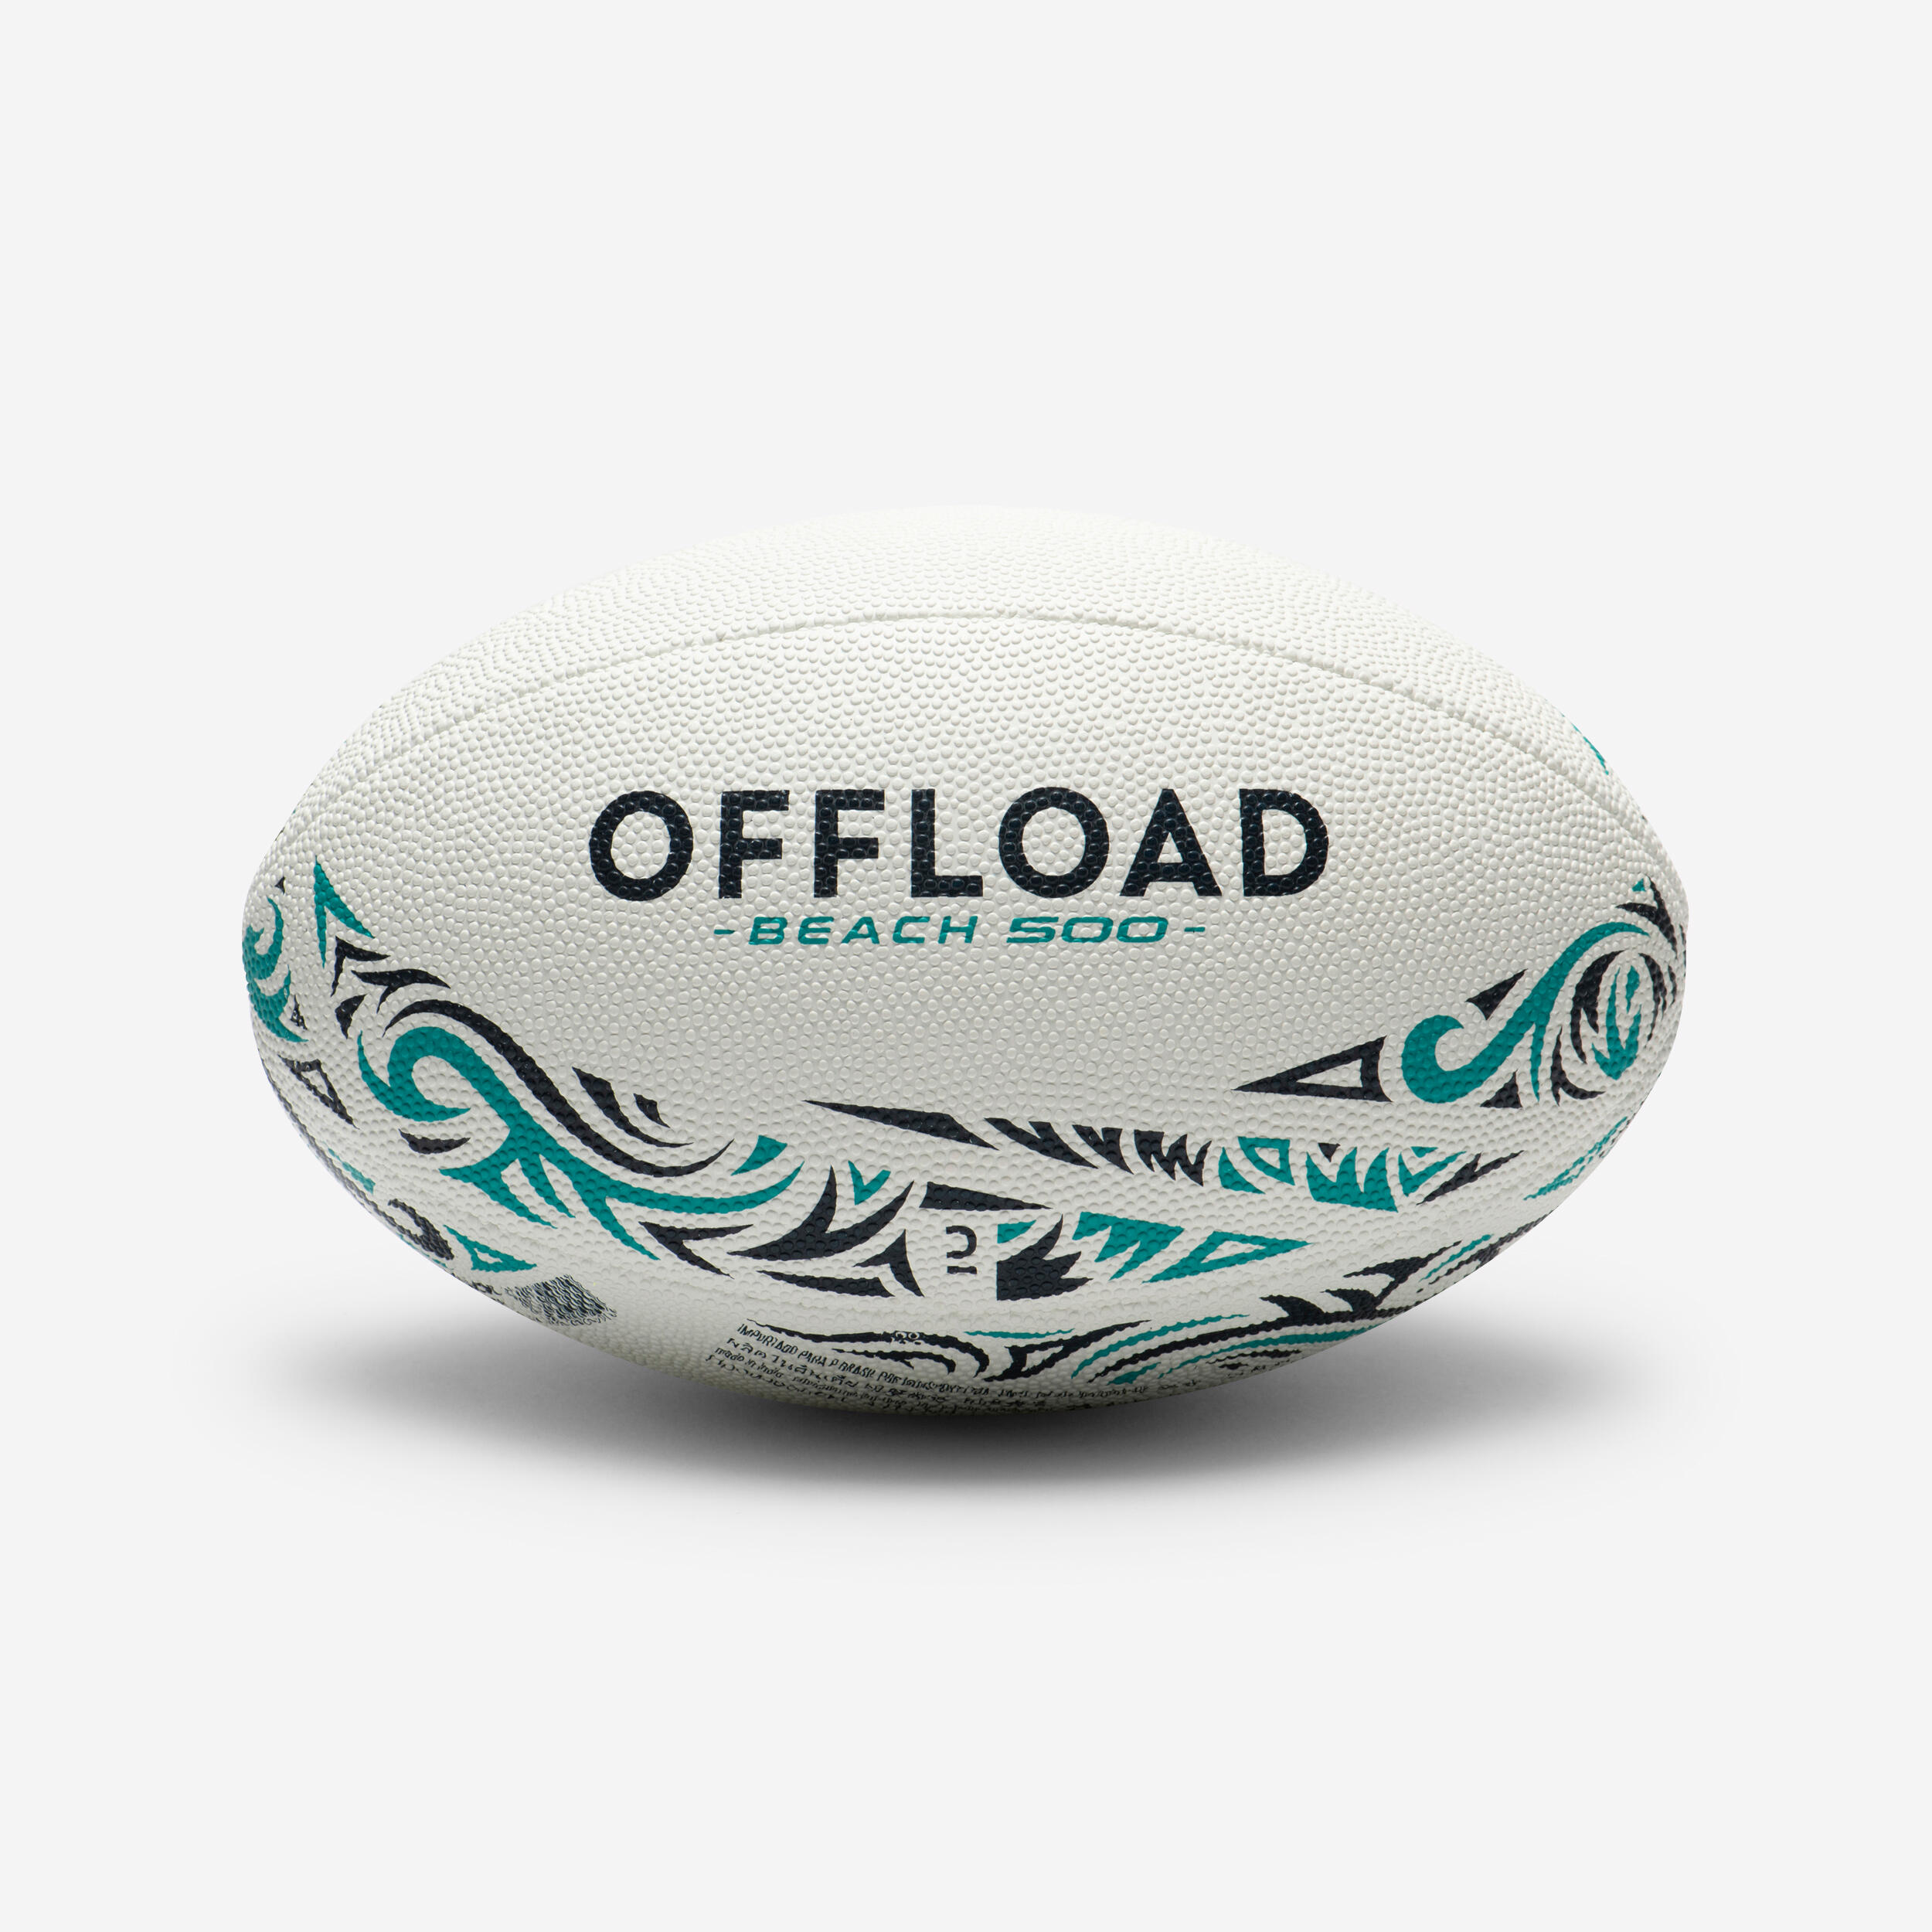 OFFLOAD Ballon Beach Rugby Taille 4 - R500 Match Blanc